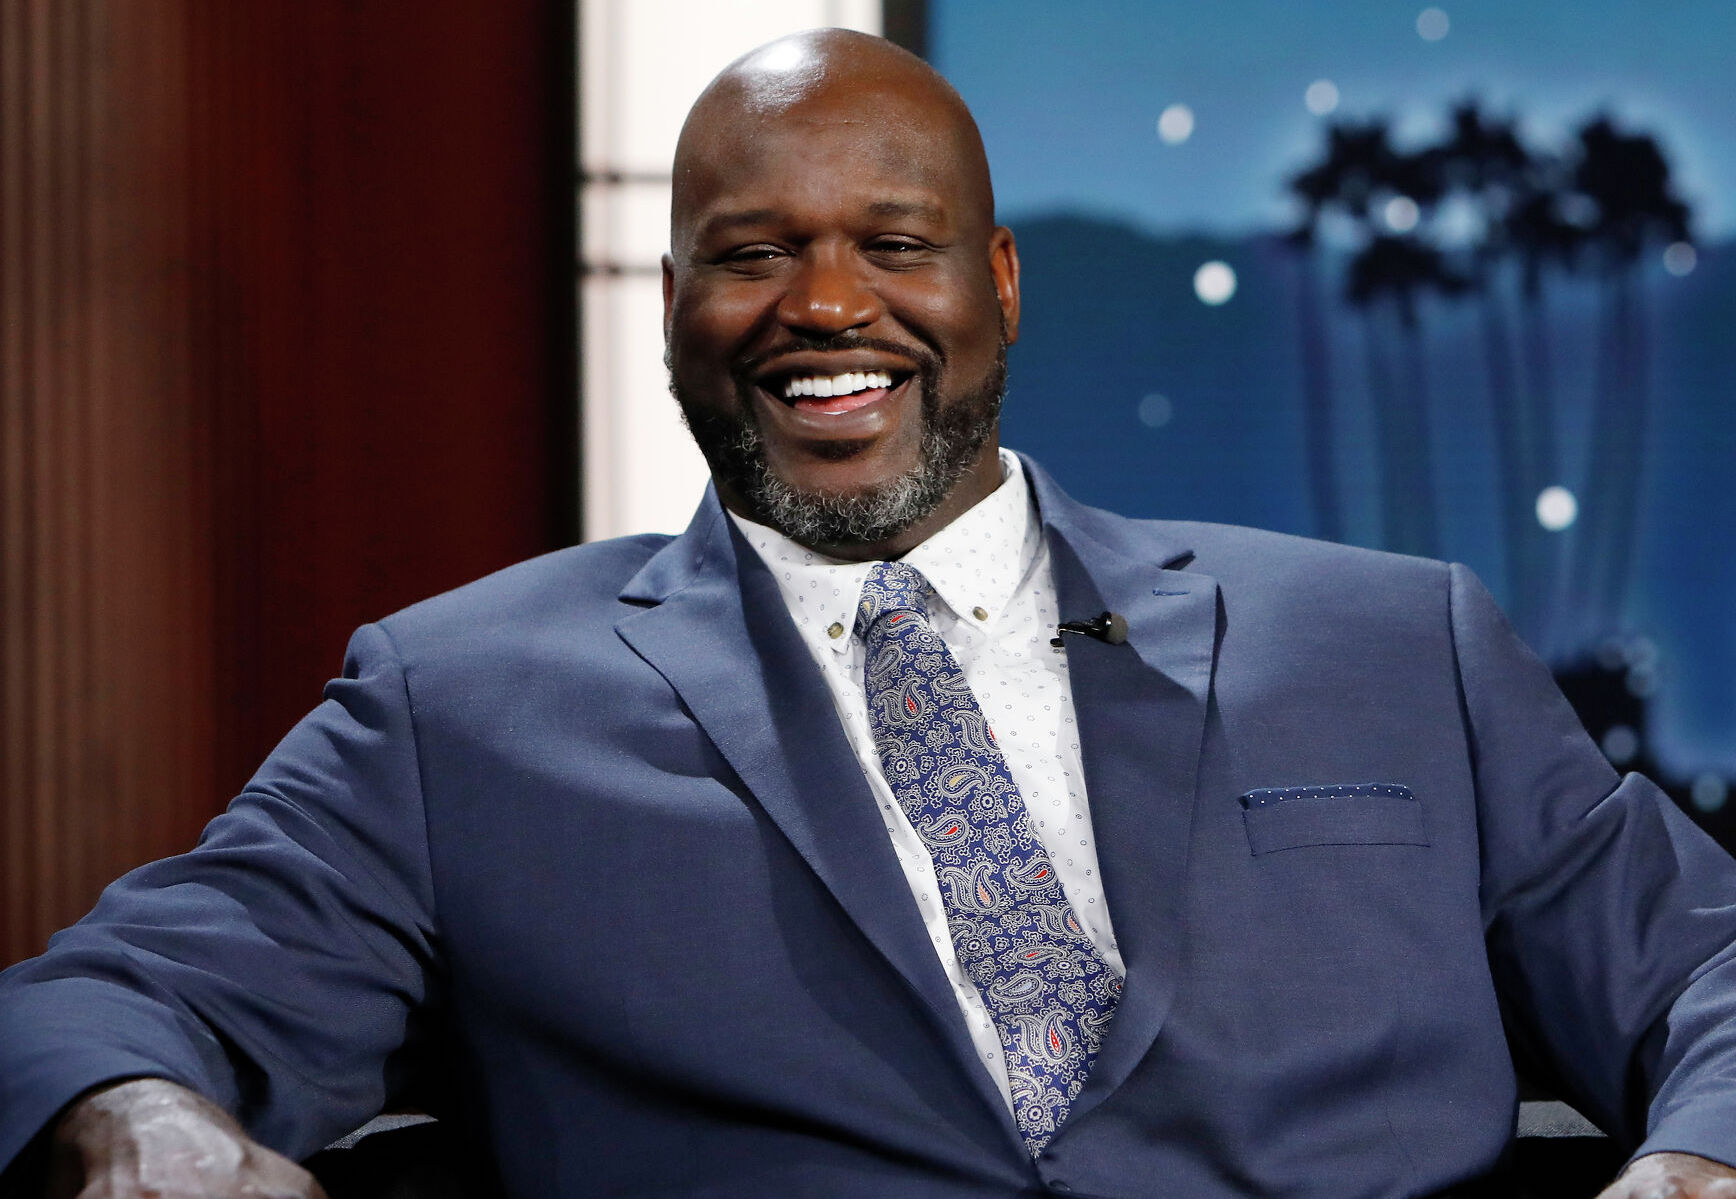 Shaquille O'Neal Net Worth - $400 Million Of The Center 'Shaq'